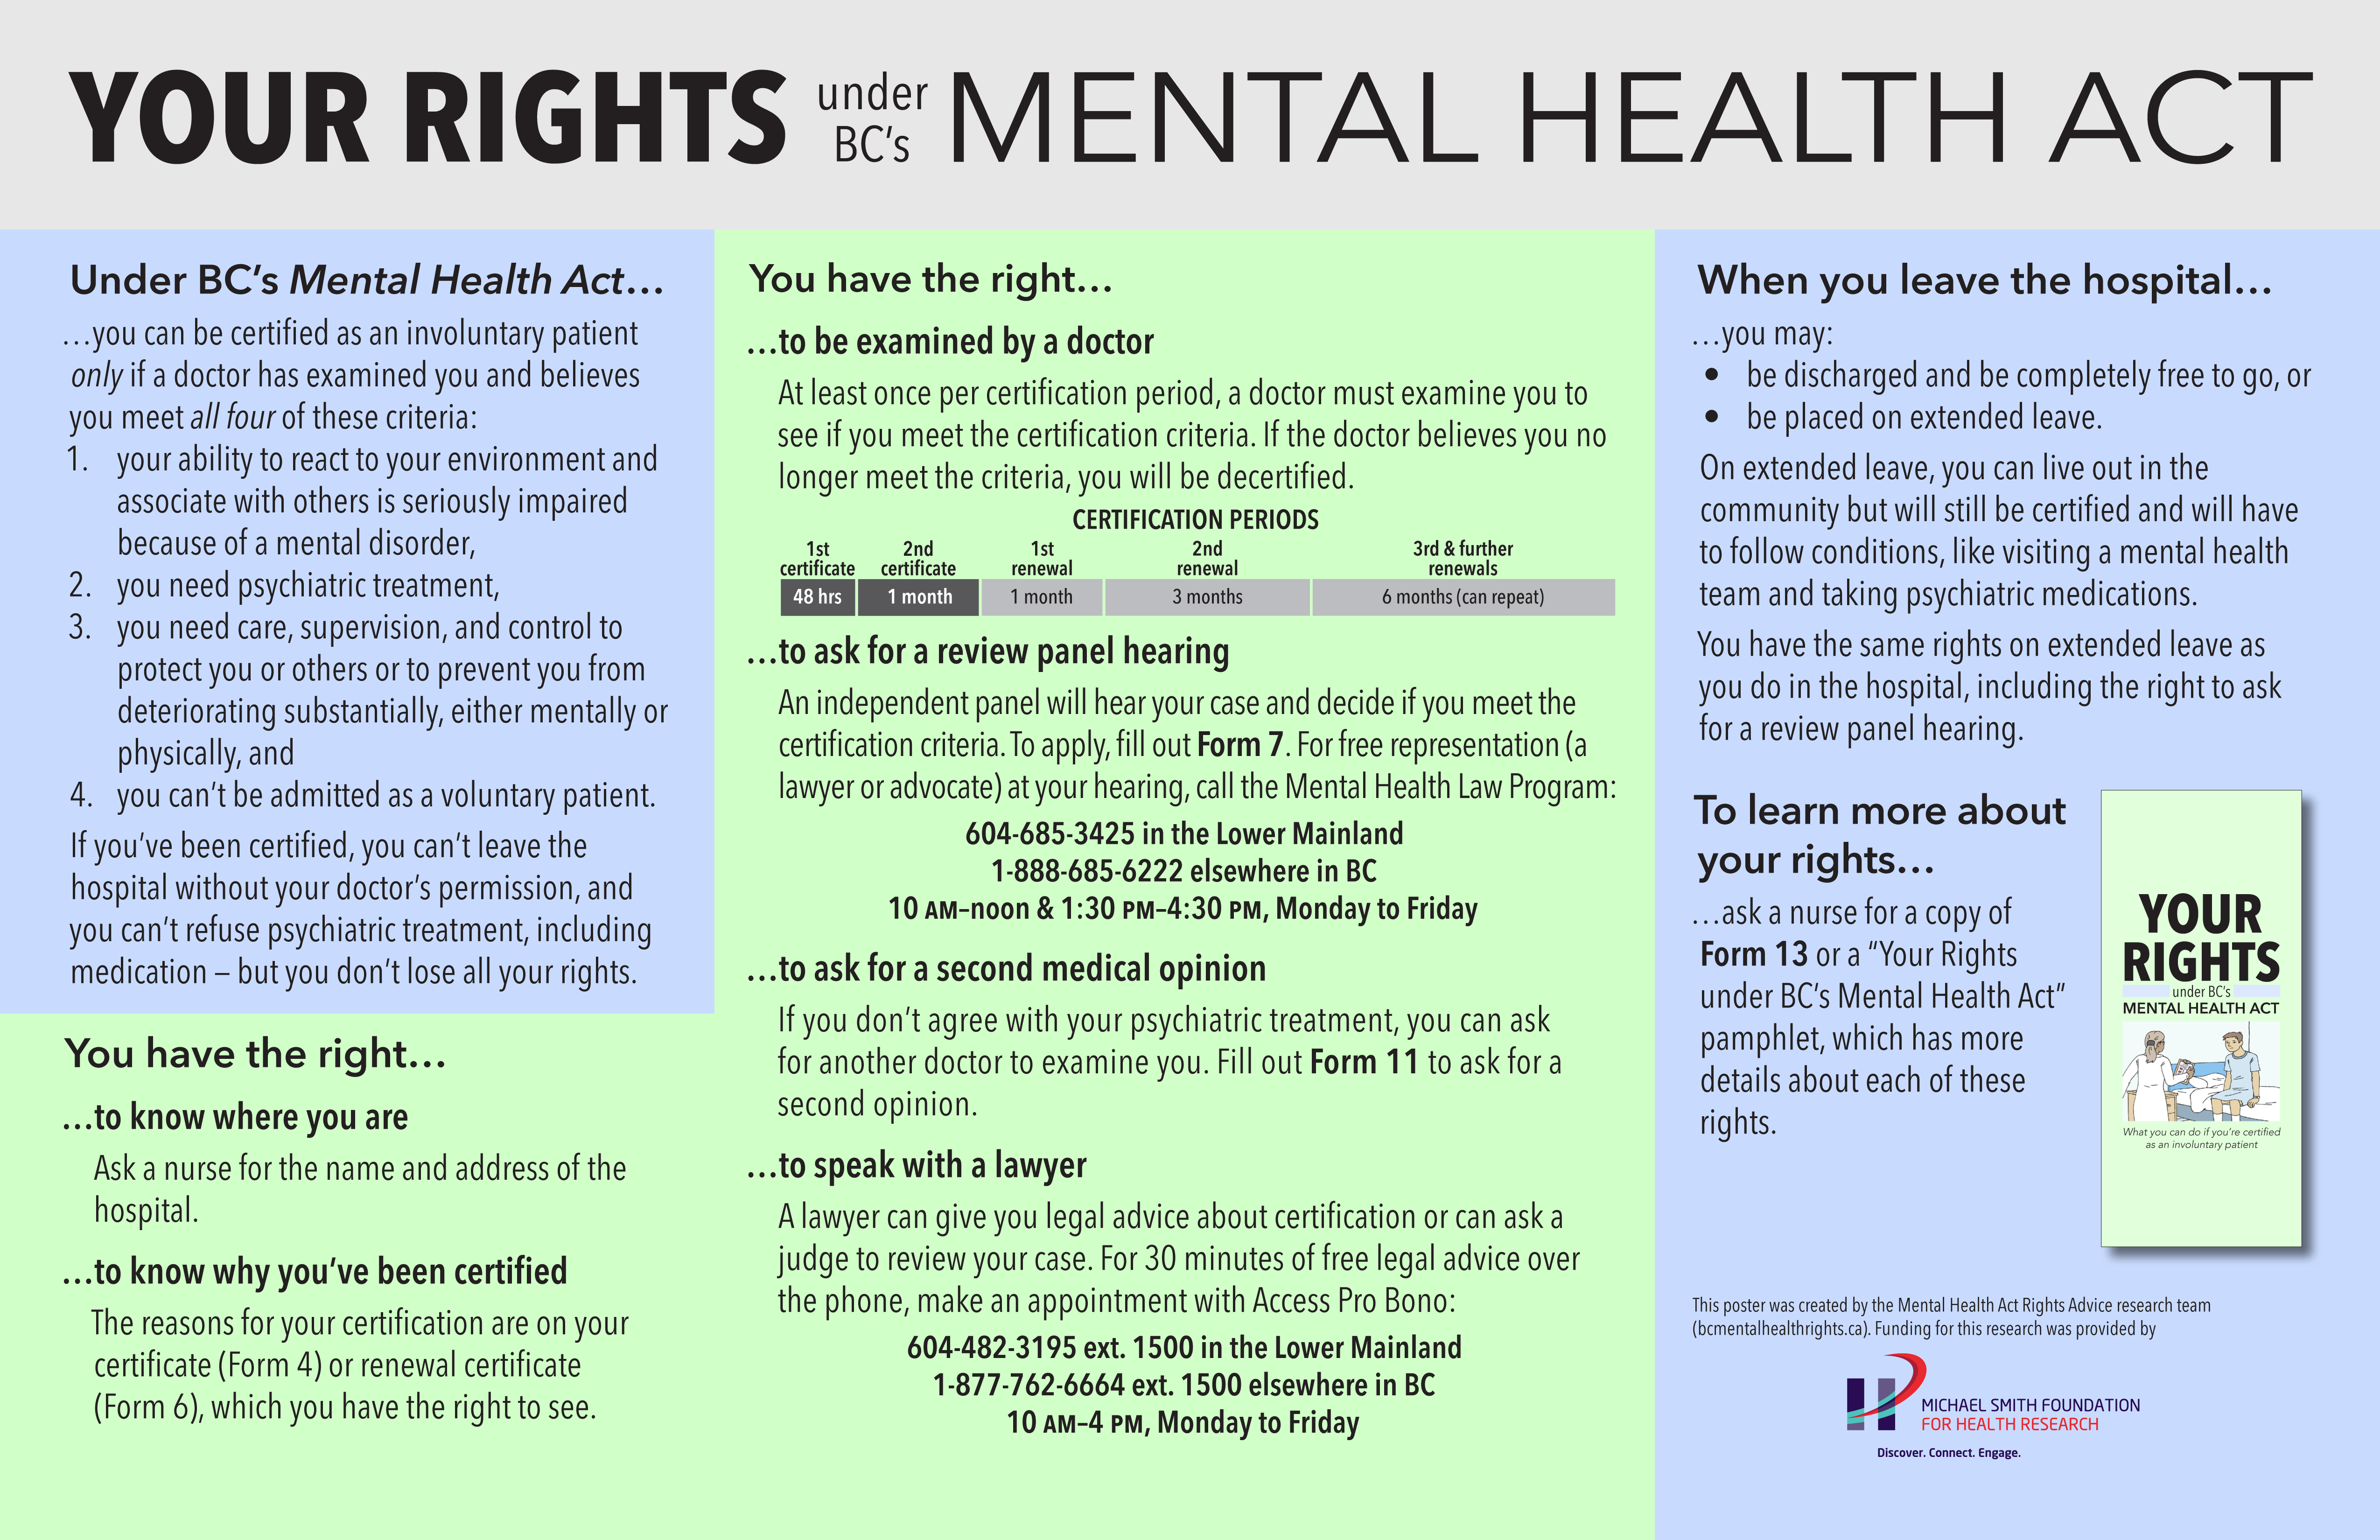 Large poster. Text says, "Your rights under BC's Mental Health Act. Under BC’s Mental Health Act… …you can be certified as an involuntary patient only if a doctor has examined you and believes you meet all four of these criteria: 1. your ability to react to your environment and associate with others is seriously impaired because of a mental disorder, 2. you need psychiatric treatment, 3. you need care, supervision, and control to protect you or others or to prevent you from deteriorating substantially, either mentally or physically, and 4. you can’t be admitted as a voluntary patient. If you’ve been certified, you can’t leave the hospital without your doctor’s permission, and you can’t refuse psychiatric treatment, including medication — but you don’t lose all your rights. You have the right… …to know where you are Ask a nurse for the name and address of the hospital. …to know why you’ve been certified The reasons for your certification are on your certificate (Form 4) or renewal certificate (Form 6), which you have the right to see. You have the right… …to be examined by a doctor At least once per certification period, a doctor must examine you to see if you meet the certification criteria. If the doctor believes you no longer meet the criteria, you will be decertified. …to ask for a review panel hearing An independent panel will hear your case and decide if you meet the certification criteria. To apply, fill out Form 7. For free representation (a lawyer or advocate) at your hearing, call the Mental Health Law Program: 604-685-3425 in the Lower Mainland 1-888-685-6222 elsewhere in BC 10 am–noon & 1:30 pm–4:30 pm, Monday to Friday …to ask for a second medical opinion If you don’t agree with your psychiatric treatment, you can ask for another doctor to examine you. Fill out Form 11 to ask for a second opinion. …to speak with a lawyer A lawyer can give you legal advice about certification or can ask a judge to review your case. For 30 minutes of free legal advice over the phone, make an appointment with Access Pro Bono: 604-482-3195 ext. 1500 in the Lower Mainland 1-877-762-6664 ext. 1500 elsewhere in BC 10 am–4 pm, Monday to Friday When you leave the hospital… …you may: • be discharged and be completely free to go, or • be placed on extended leave. On extended leave, you can live out in the community but will still be certified and will have to follow conditions, like visiting a mental health team and taking psychiatric medications. You have the same rights on extended leave as you do in the hospital, including the right to ask for a review panel hearing. To learn more about your rights… …ask a nurse for a copy of Form 13 or a “Your Rights under BC’s Mental Health Act” pamphlet, which has more details about each of these rights. [An image of the front of the pamphlet is shown.] This poster was created by the Mental Health Act Rights Advice research team (bcmentalhealthrights.ca). Funding for this research was provided by the Michael Smith Foundation for Health Research." The Michael Smith Foundation for Health Research logo is shown.